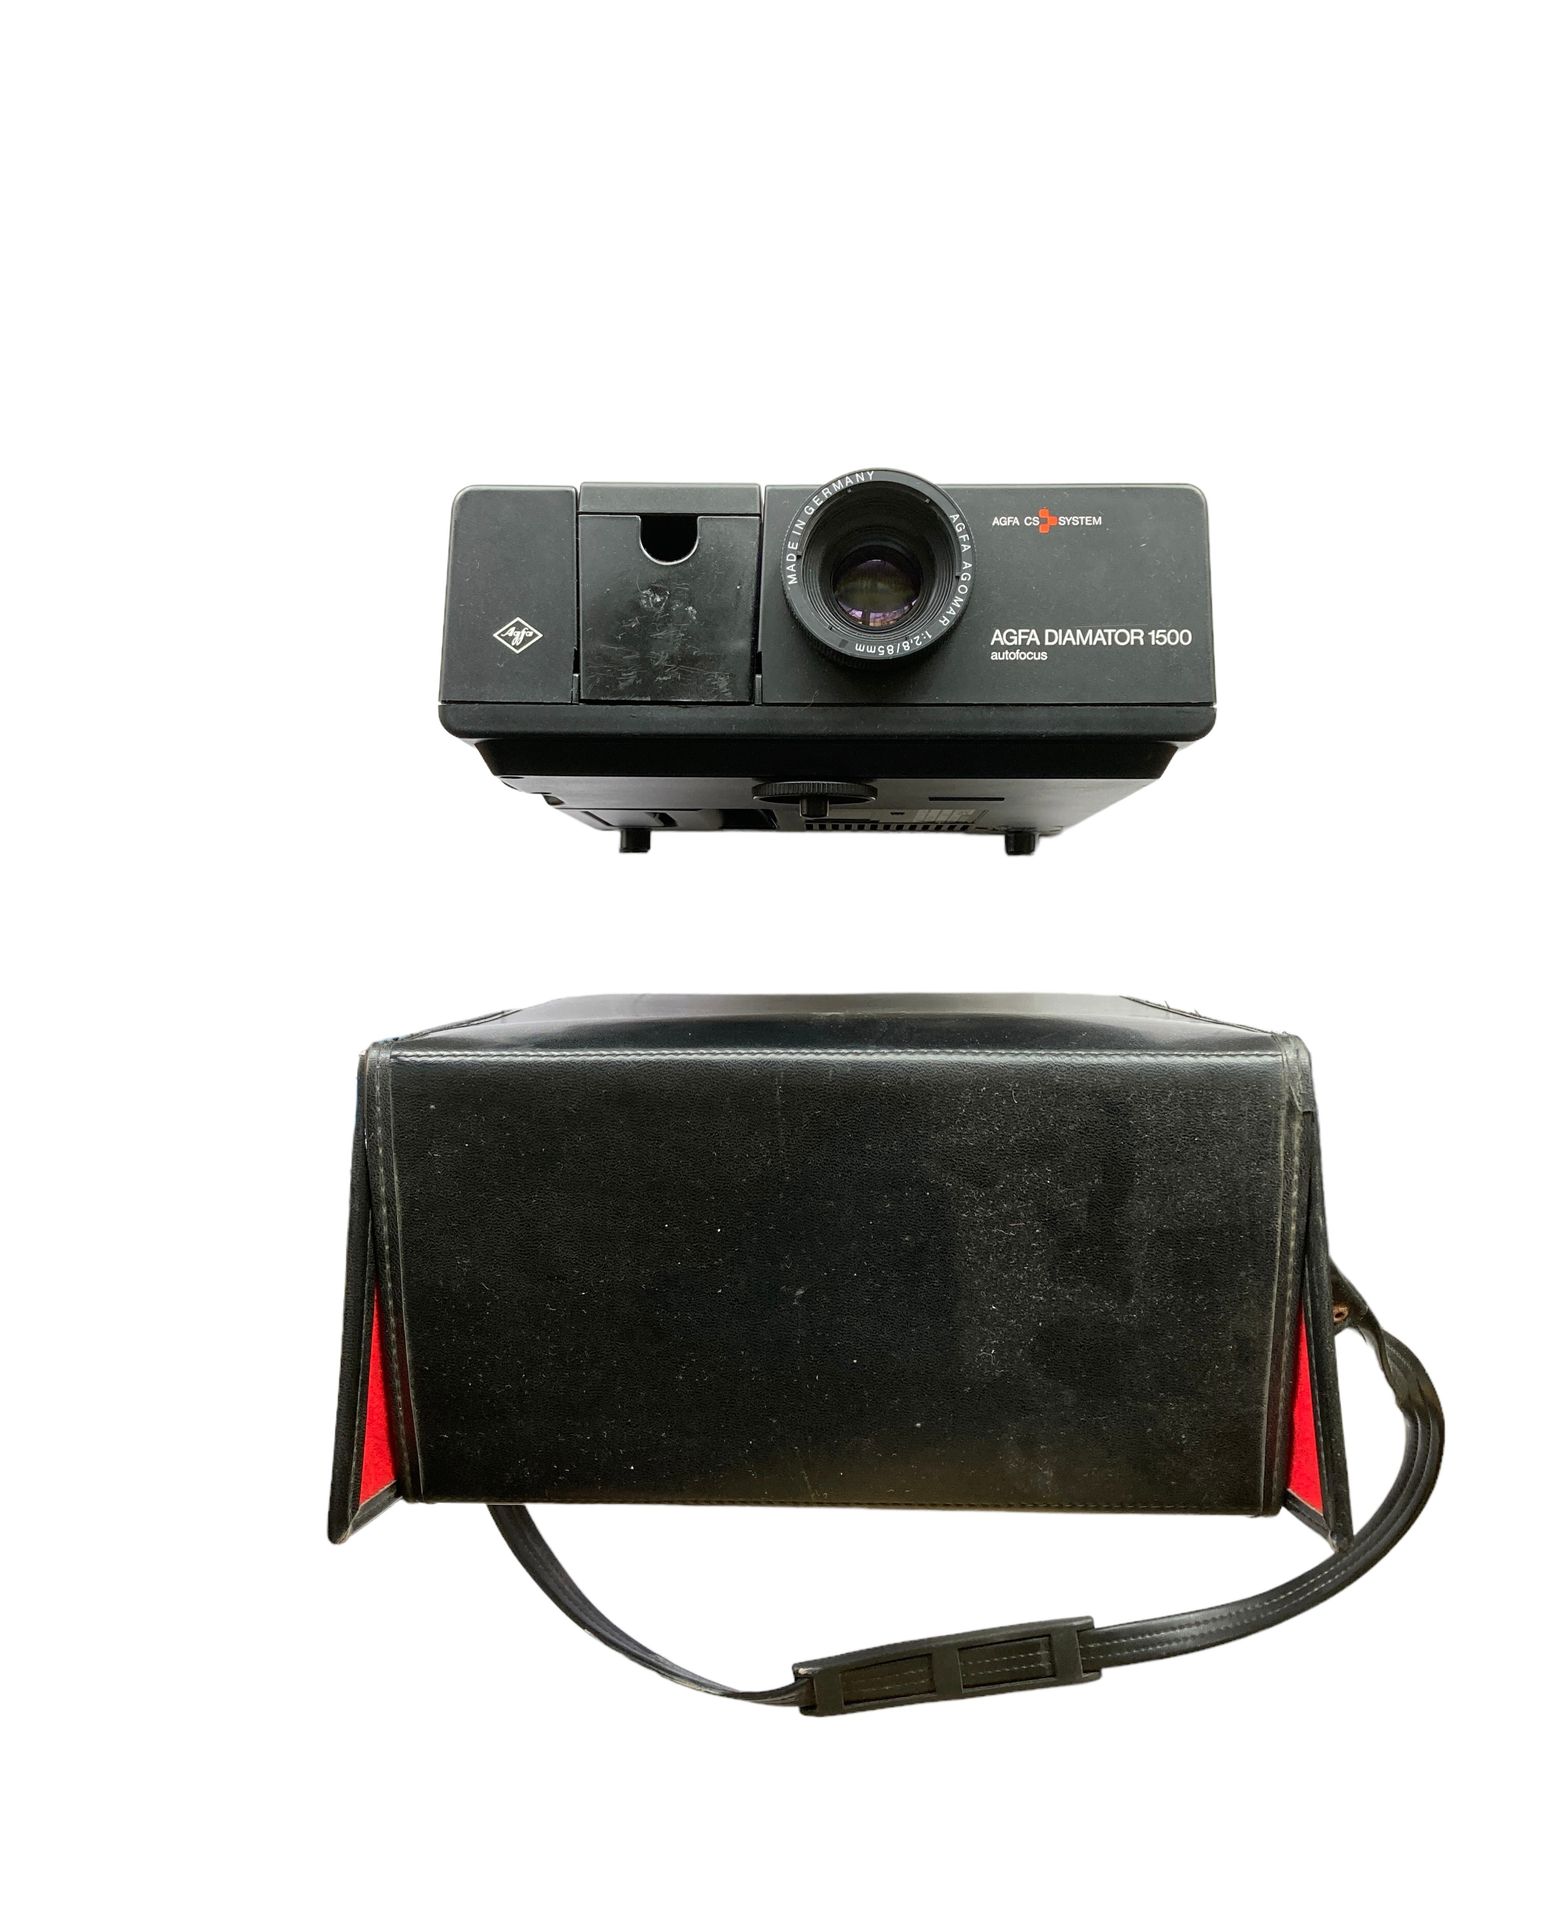 Null Y - Set of two different slide projectors: Nogamatic and Agfa